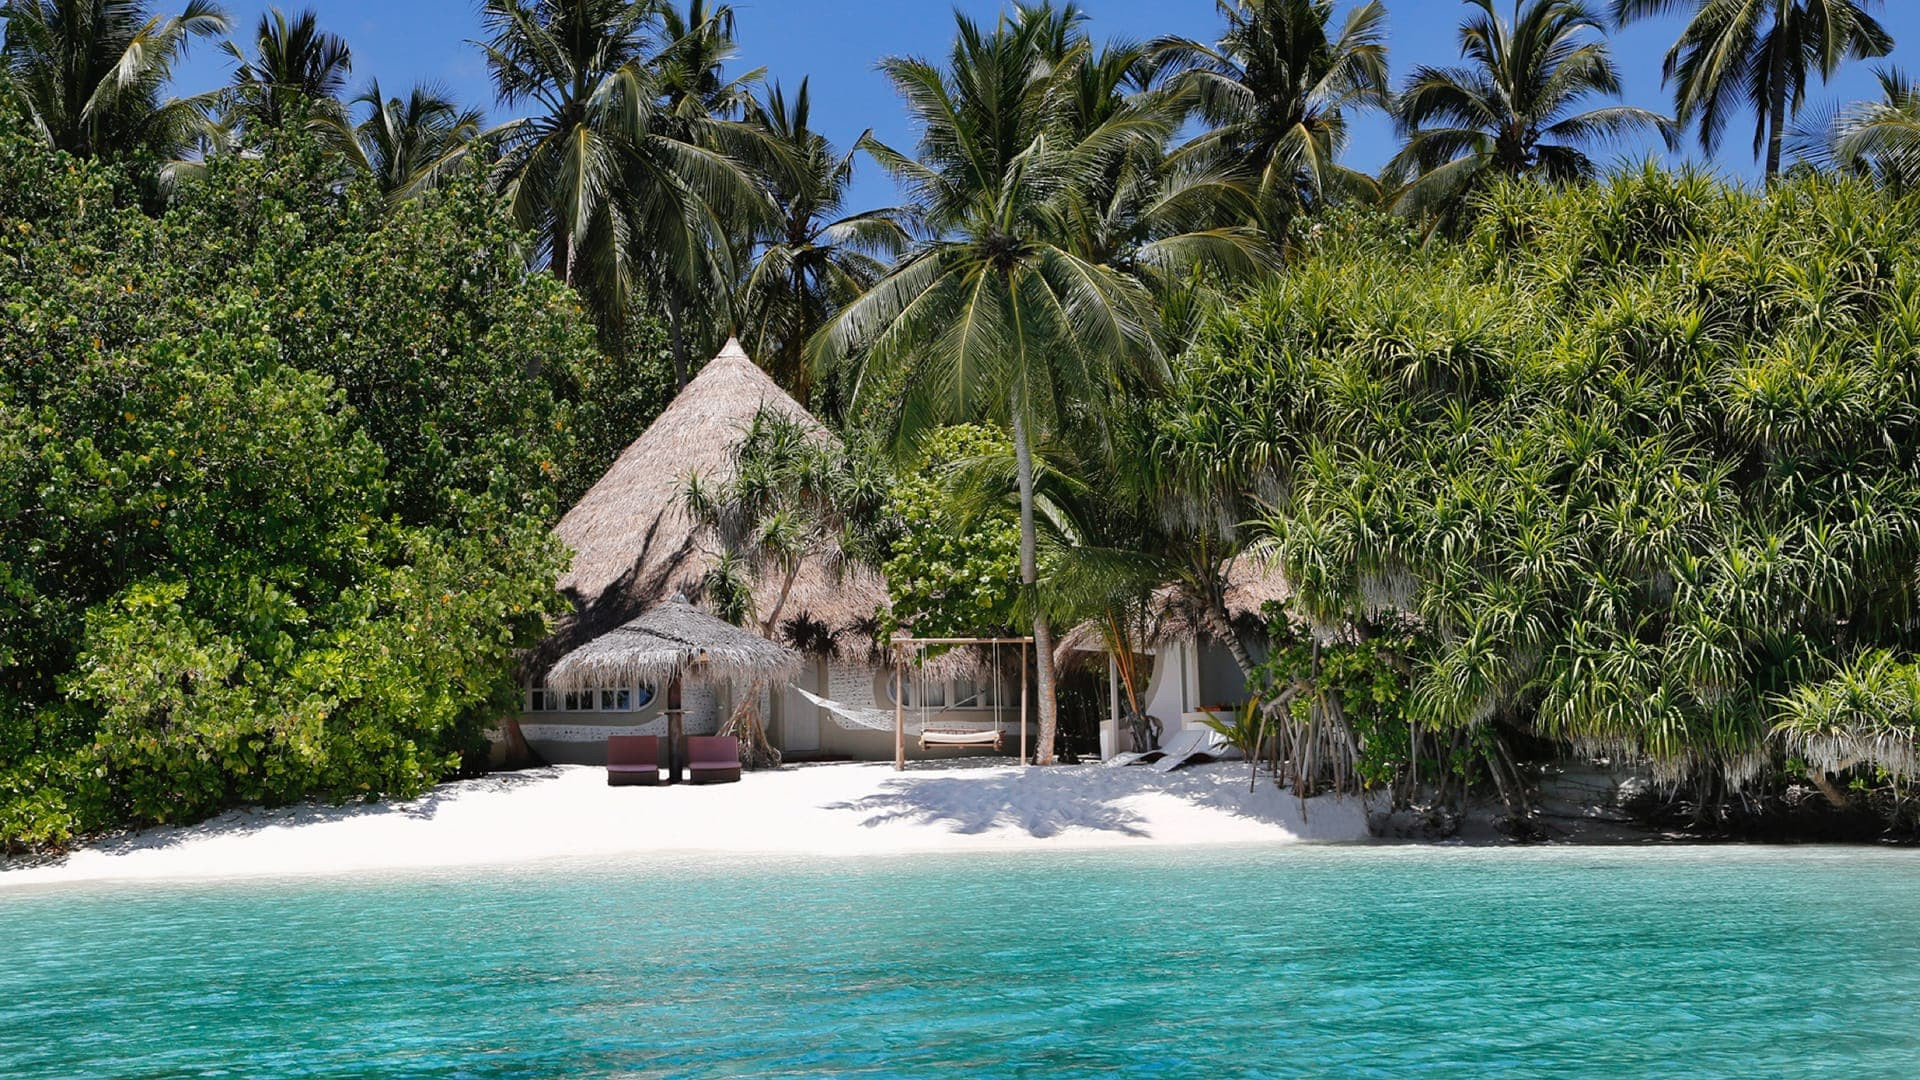 Experience a Piece of Maldivian History with the Luxurious Nika Island in August